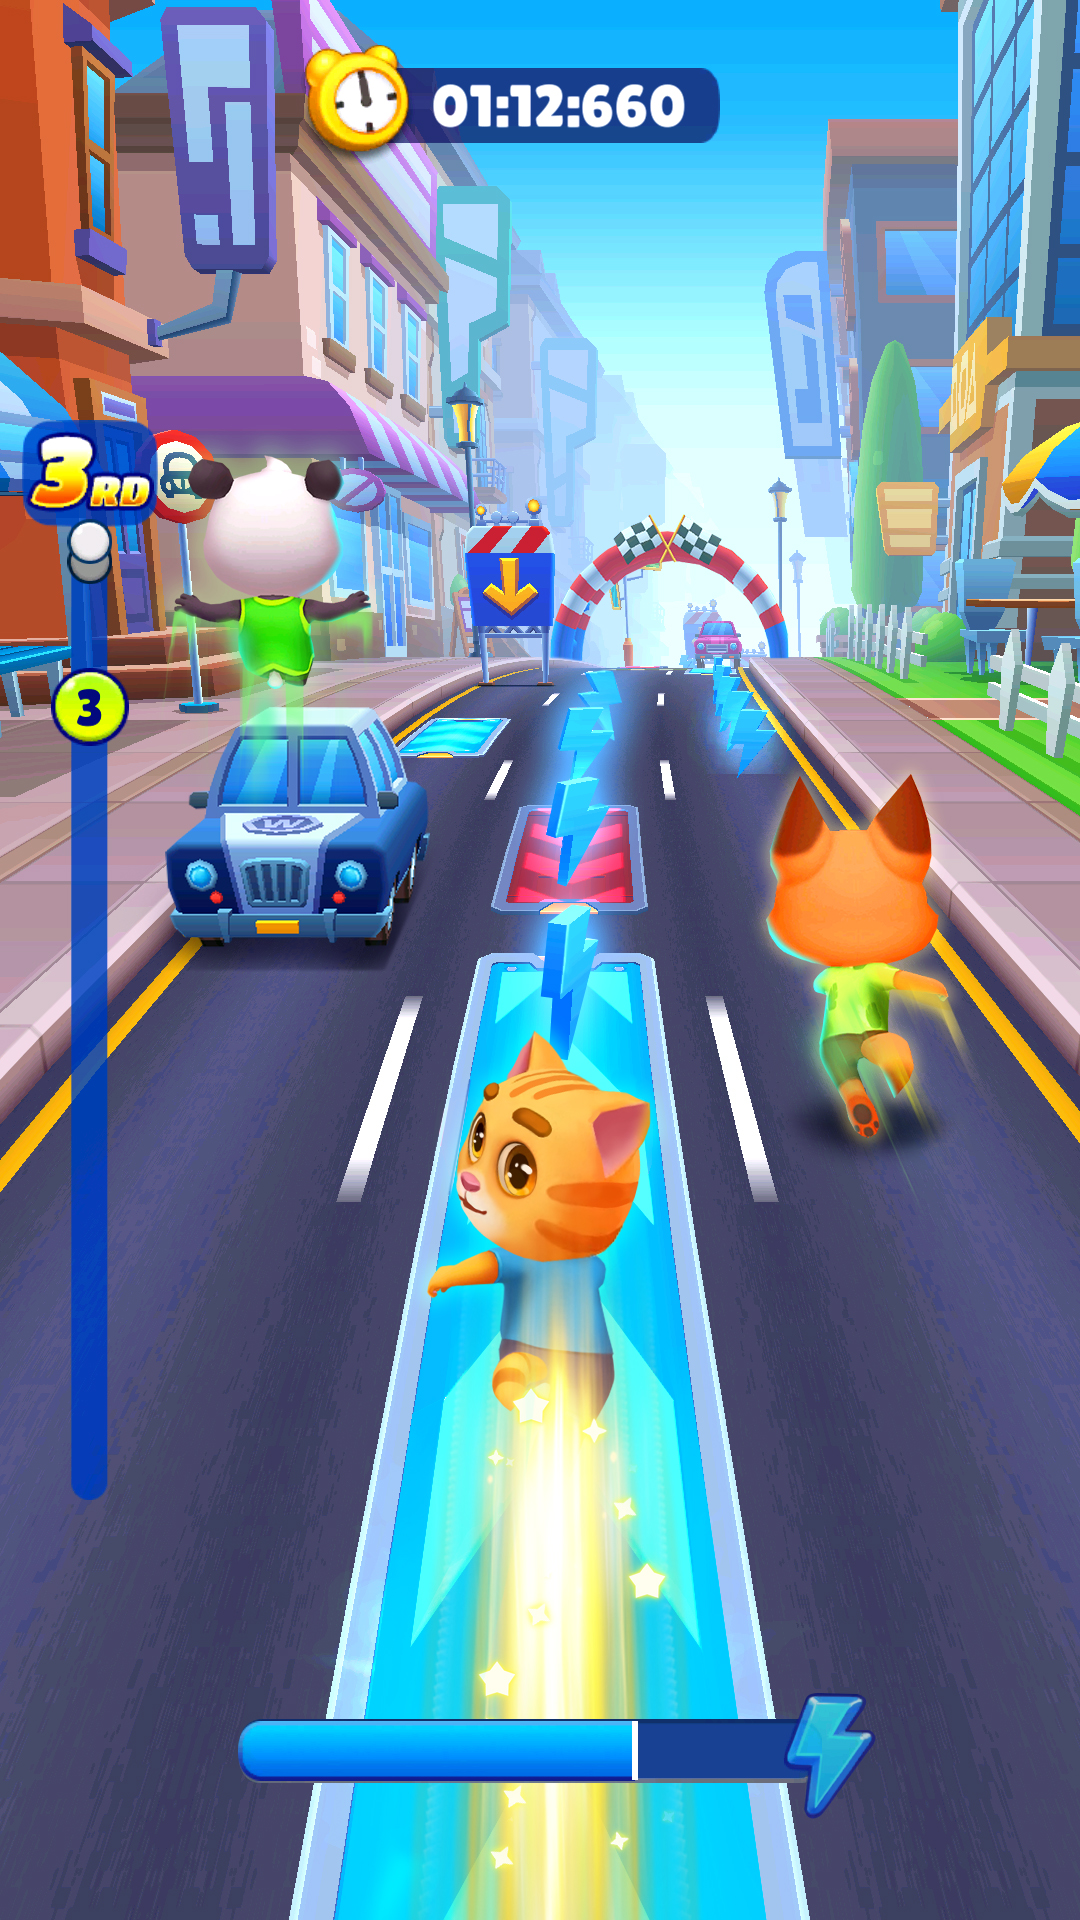 Gameplay of the Running Pet: Dec Rooms for Android phone or tablet.